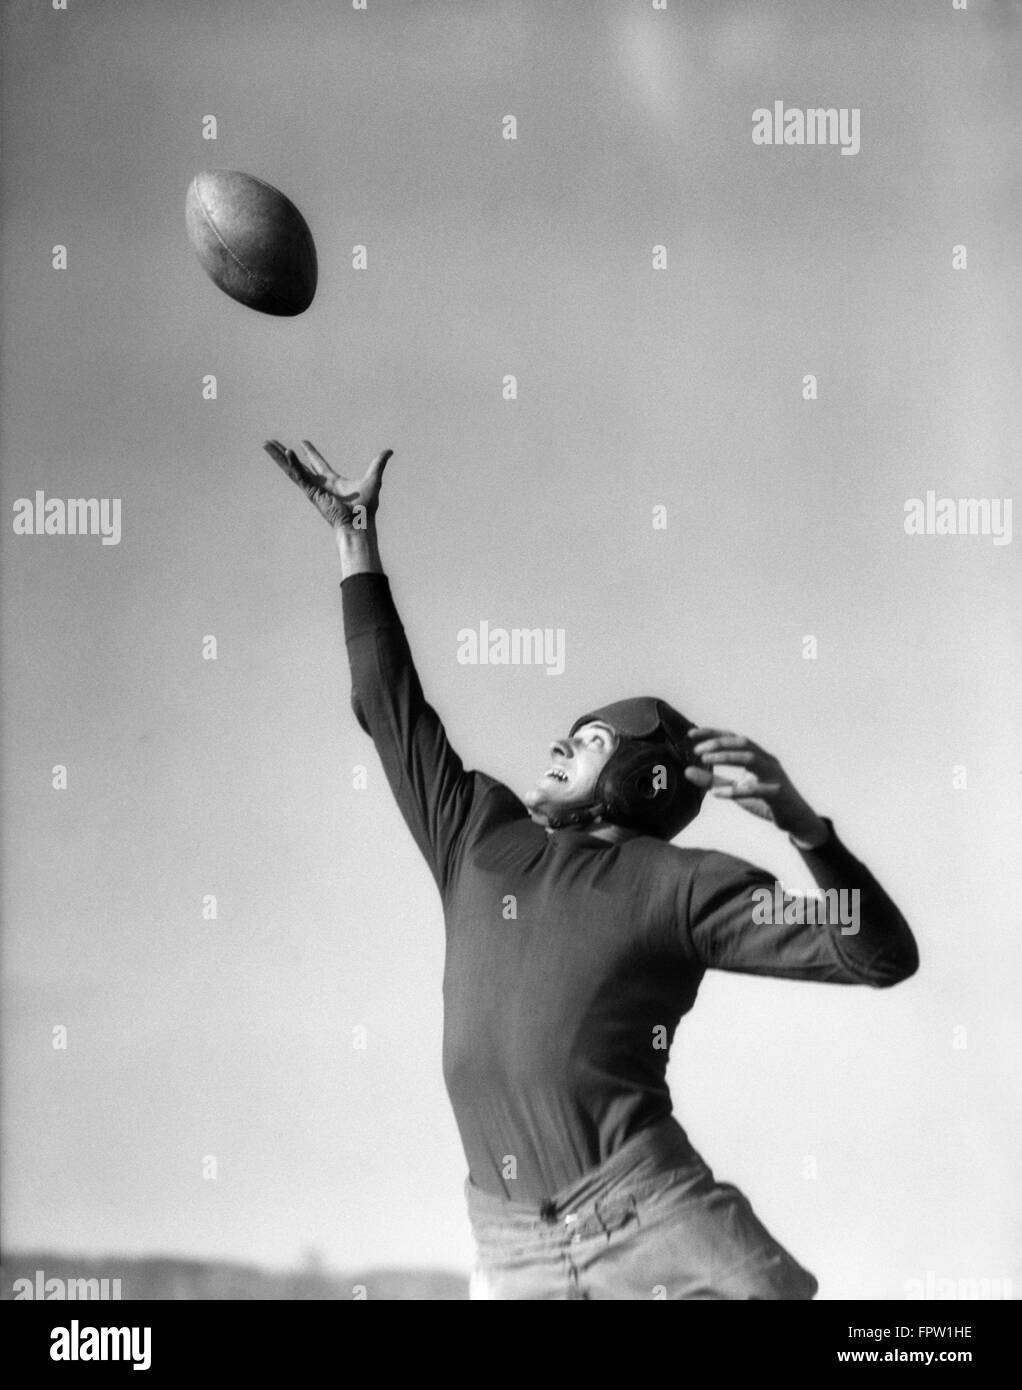 1930s FOOTBALL PLAYER REACHING UP ABOUT TO CATCH BALL Stock Photo